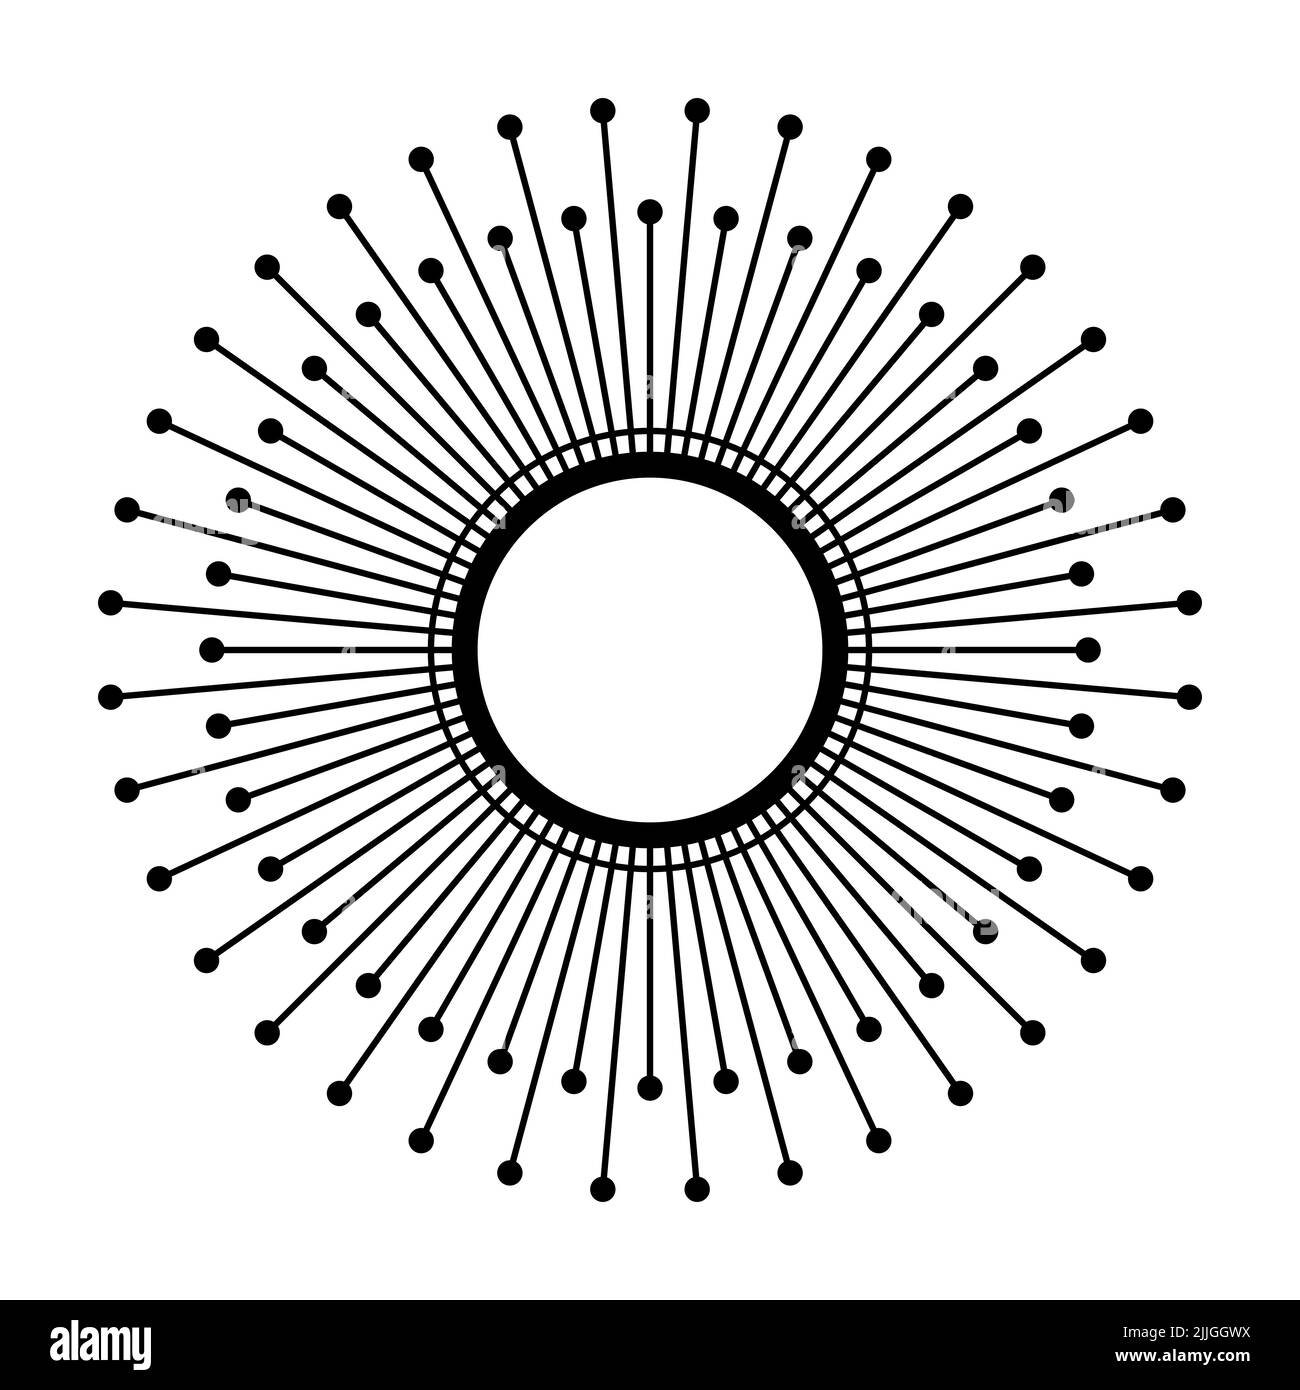 Sun symbol. Solar disk with 72, six times twelve, rays of light, with dots on each end. Variations of the sign are used for a solar monstrance. Stock Photo